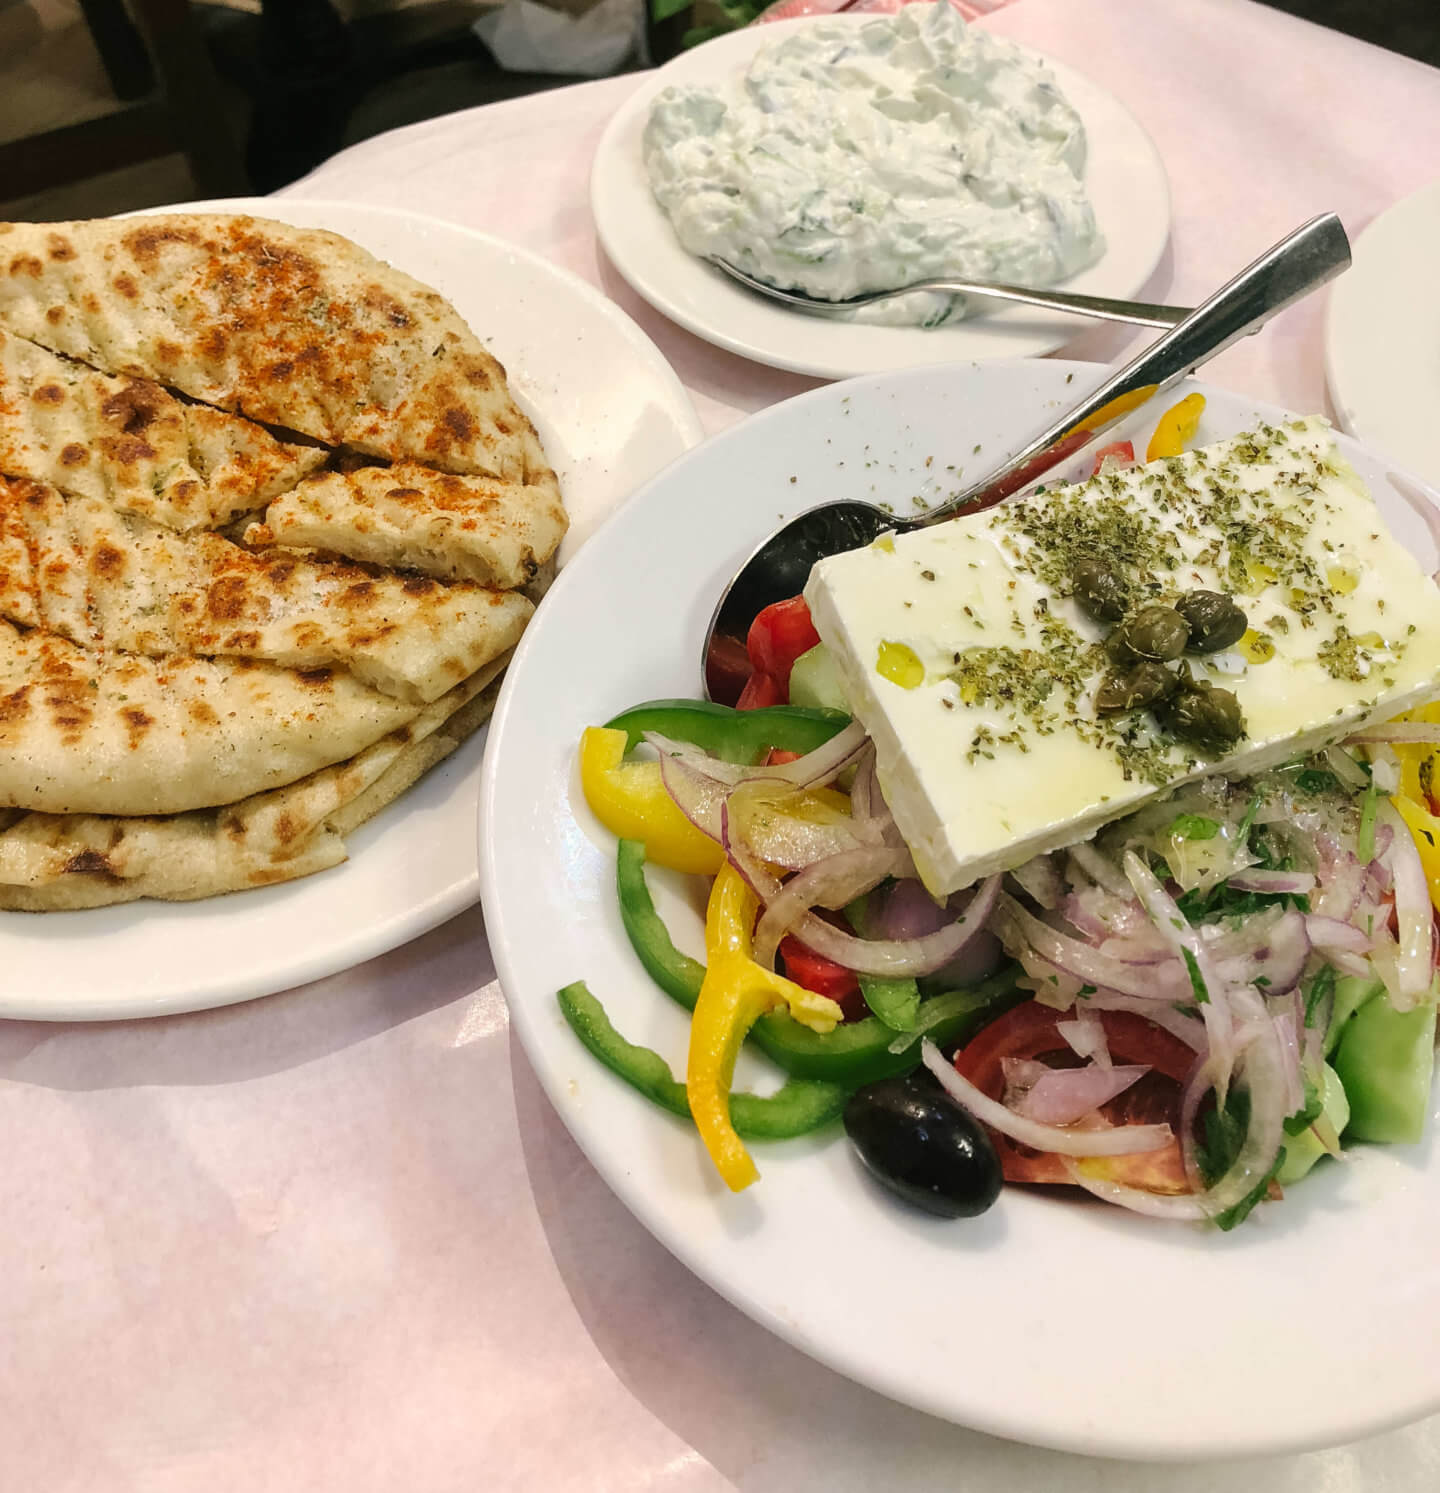 Your 10 days in Greece itinerary will allow you to try lots of Greek food like this table full of Greek salad, pita bread and tzatziki 